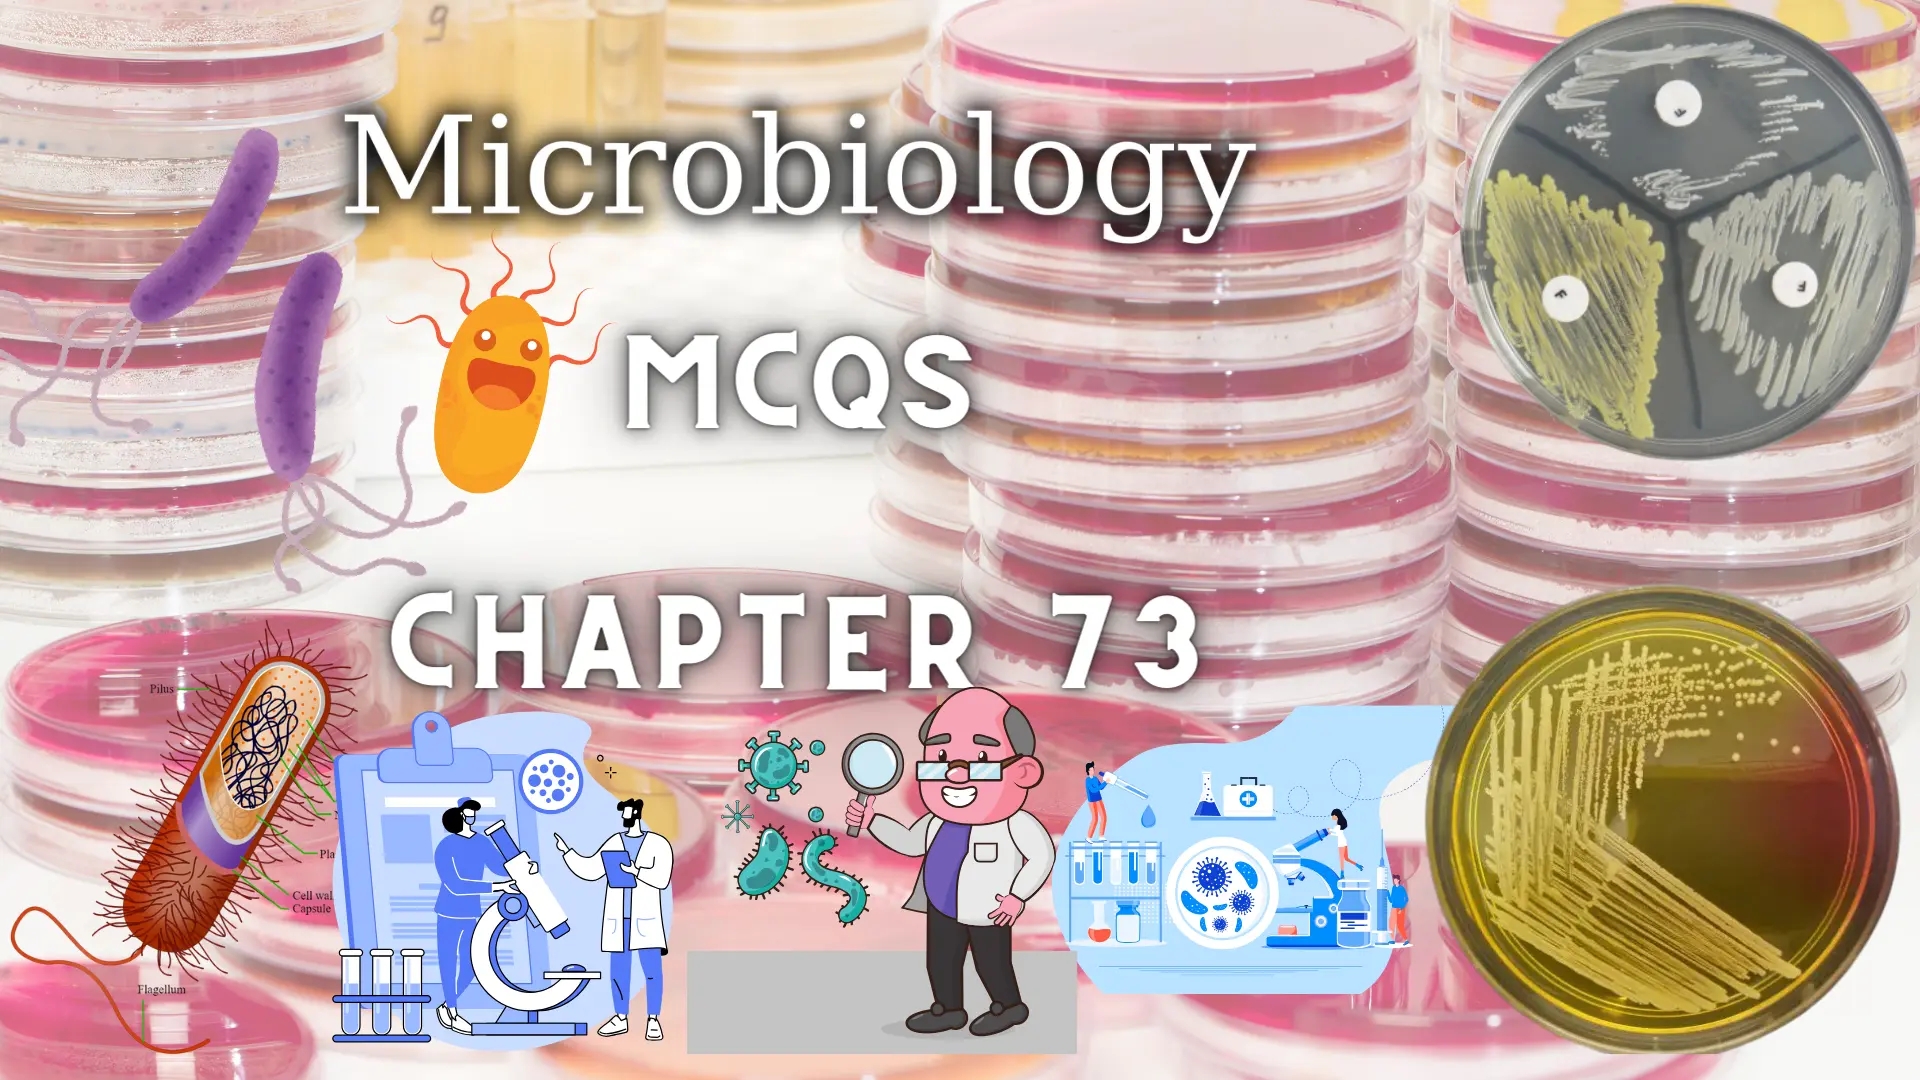 Microbiology MCQs Chapter 73